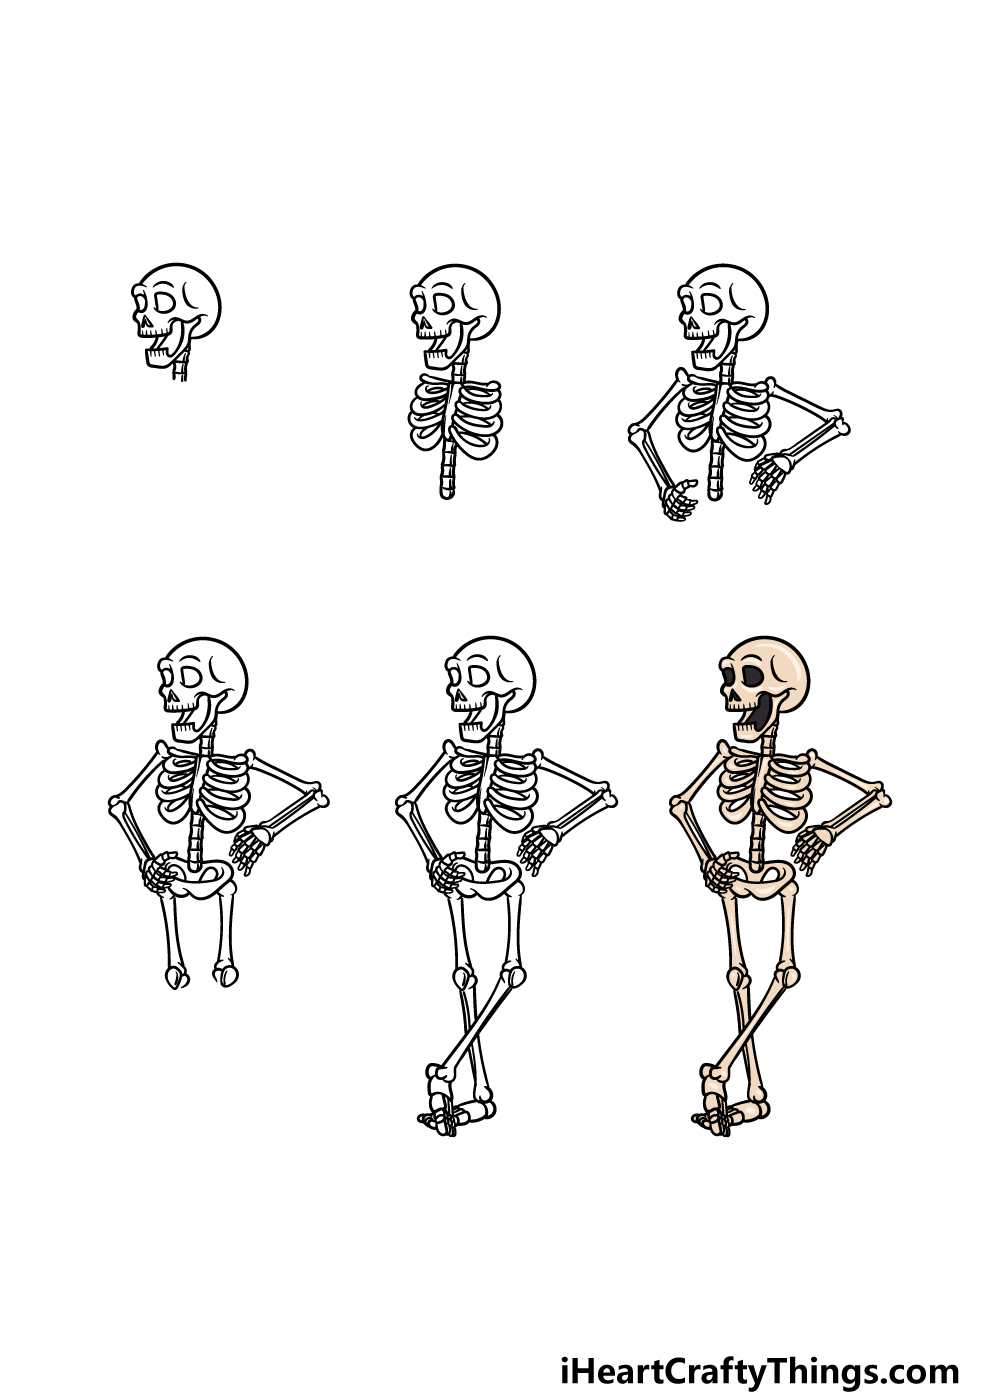 how to draw a Cartoon Skeleton in 6 steps